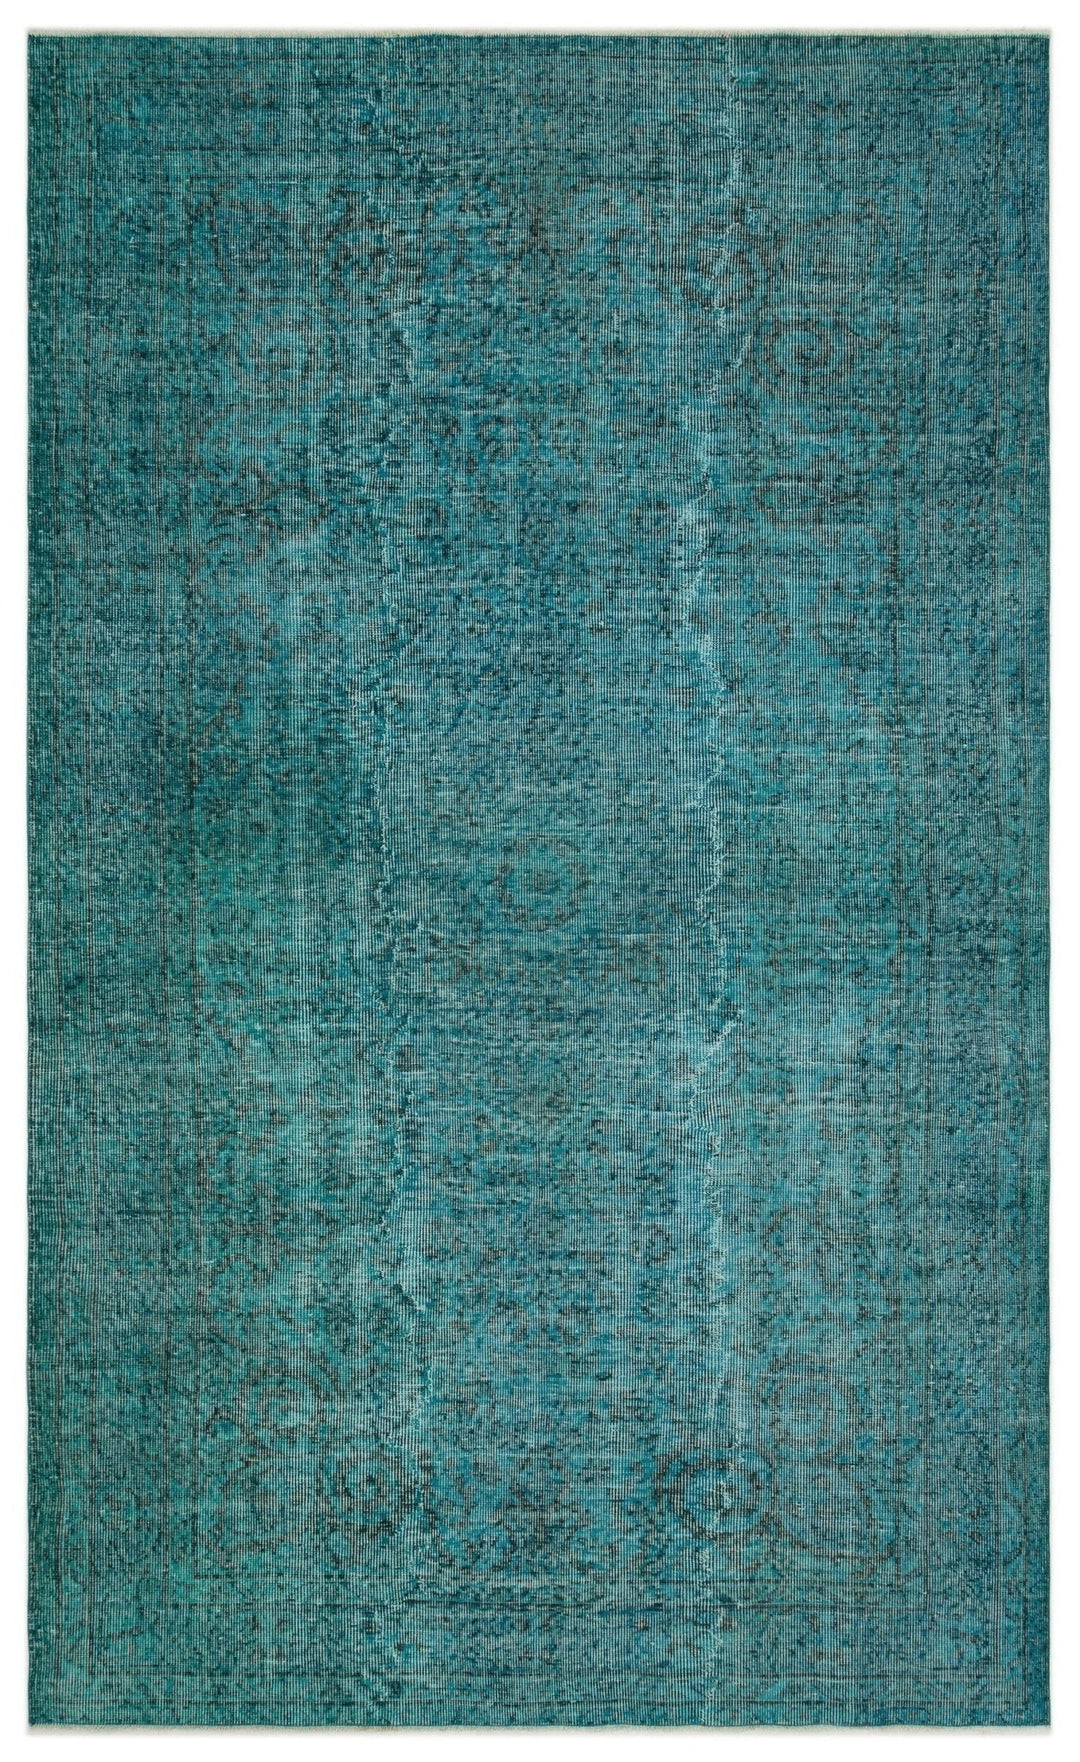 Athens 24349 Turquoise Tumbled Wool Hand Woven Carpet 164 x 273